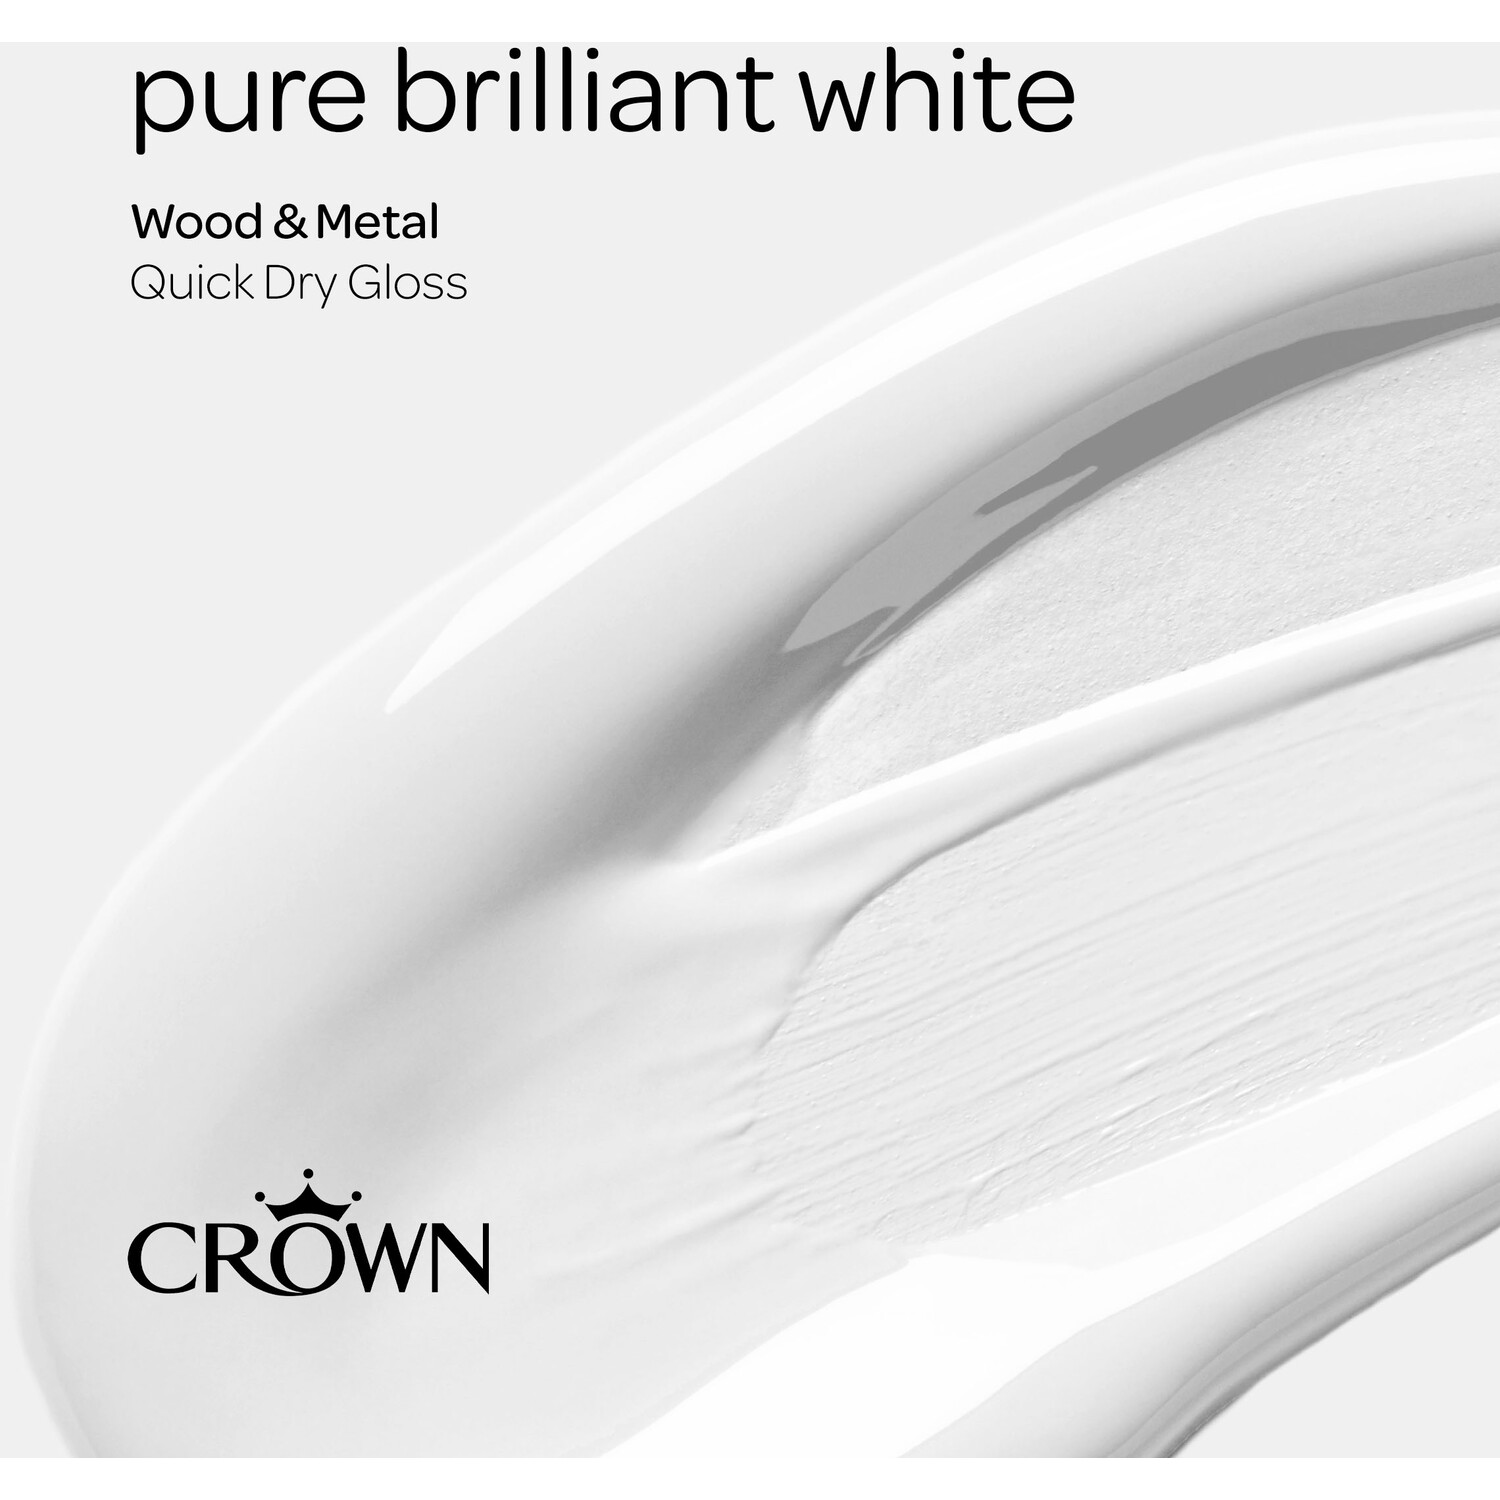 Crown Quick Dry Wood and Metal Pure Brilliant White Gloss Paint 2.5L Image 5